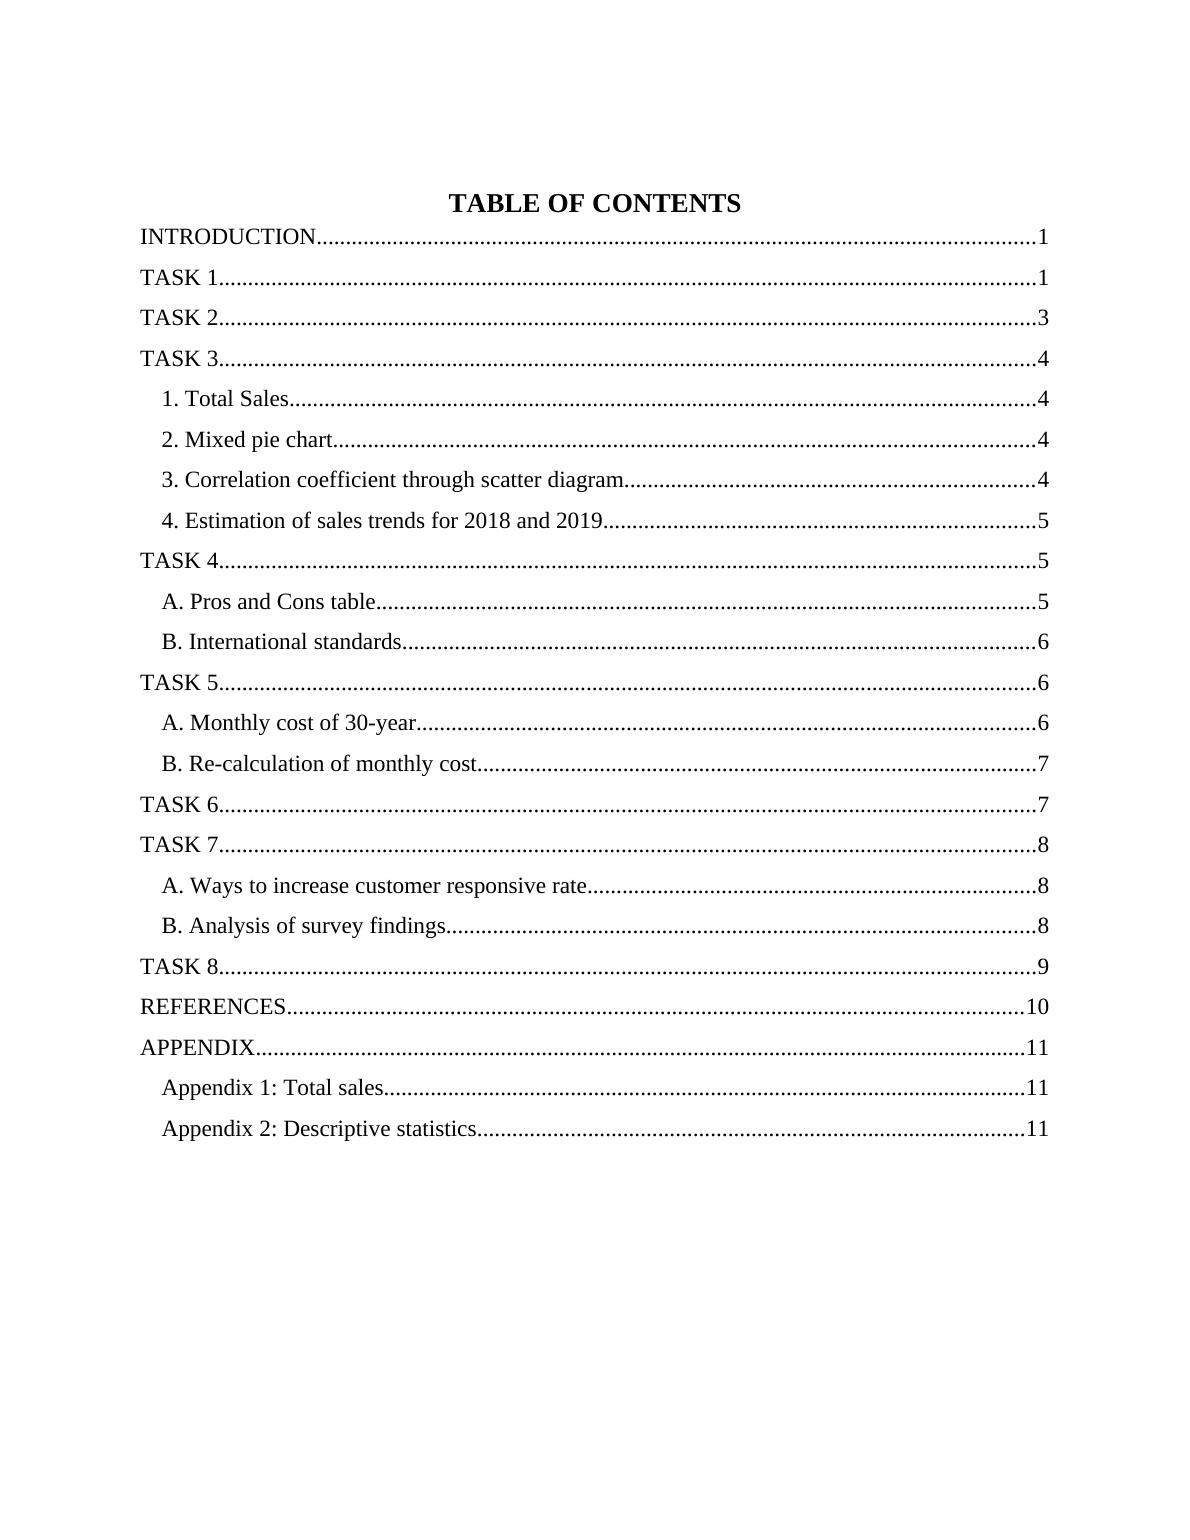 Analyzing Information & Data TABLE OF CONTENTS INTRODUCTION_2